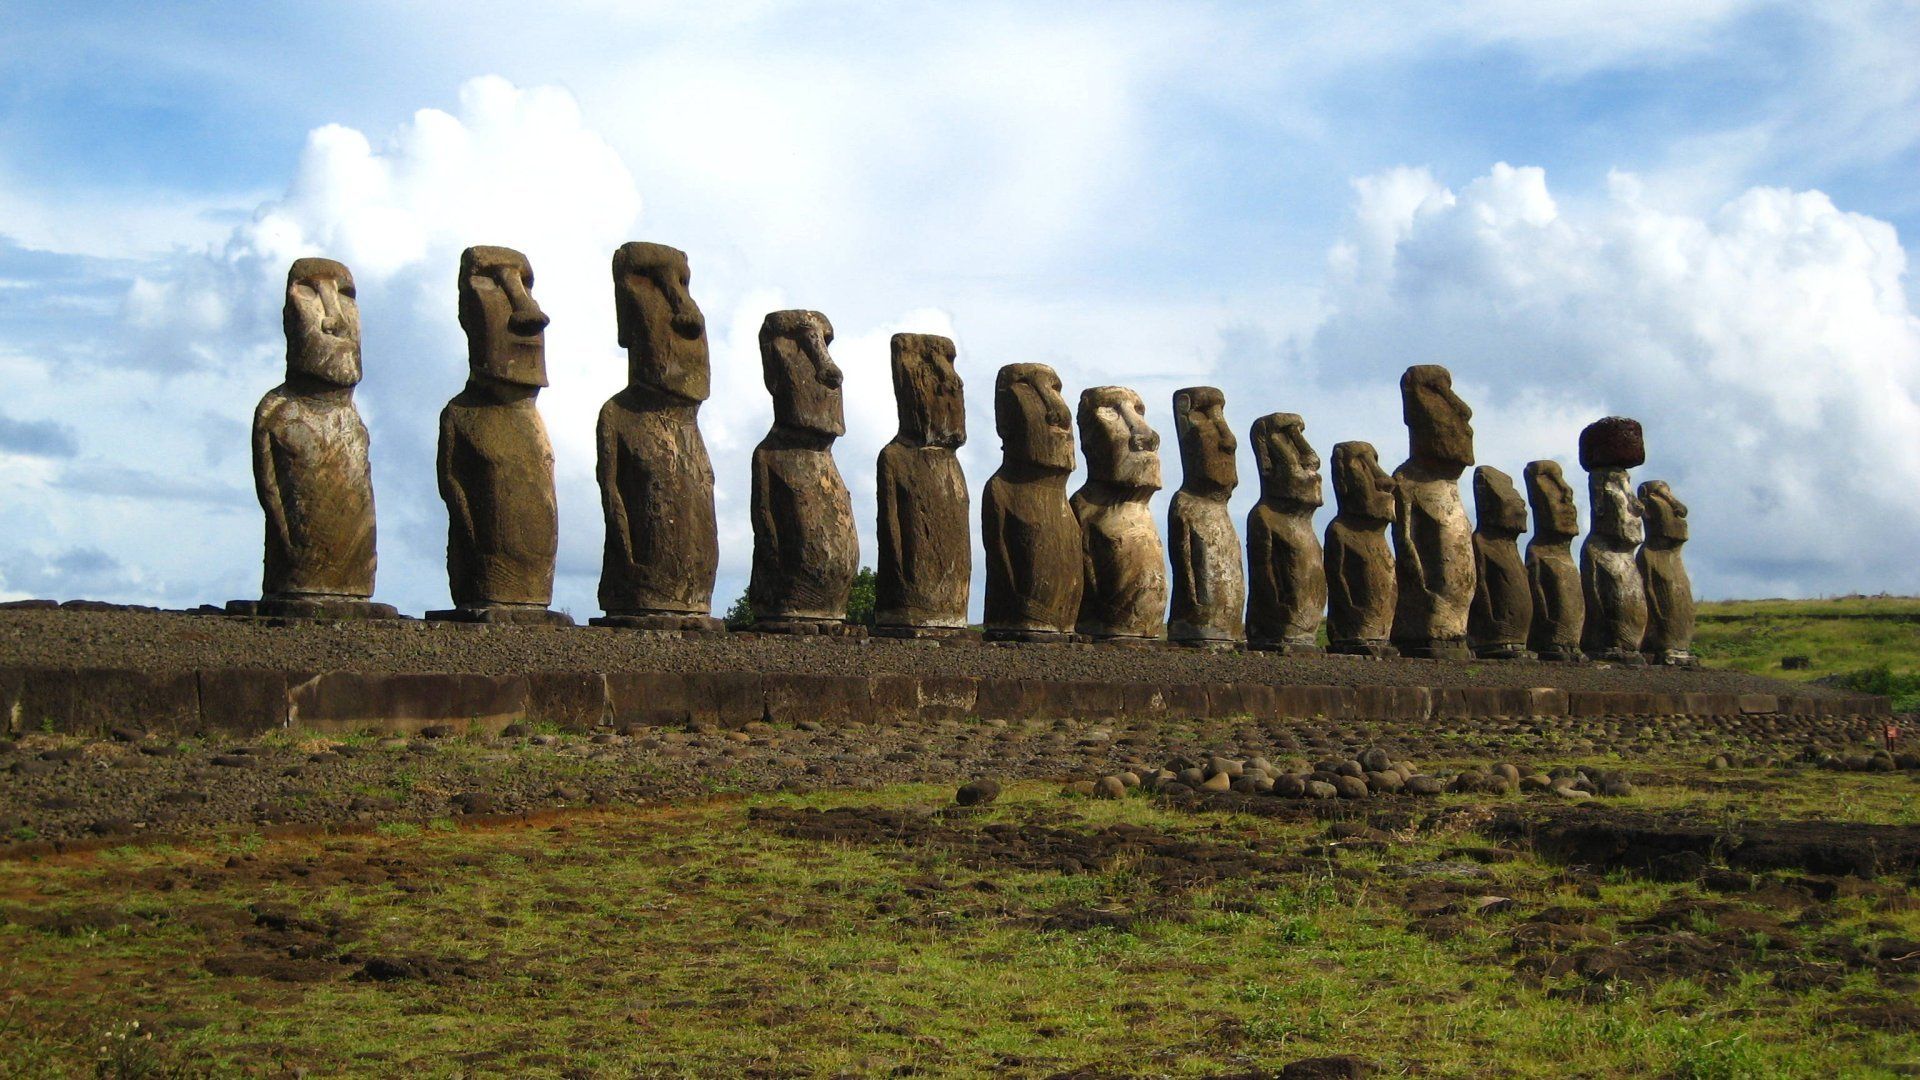 The Suns of Easter Island Backdrop